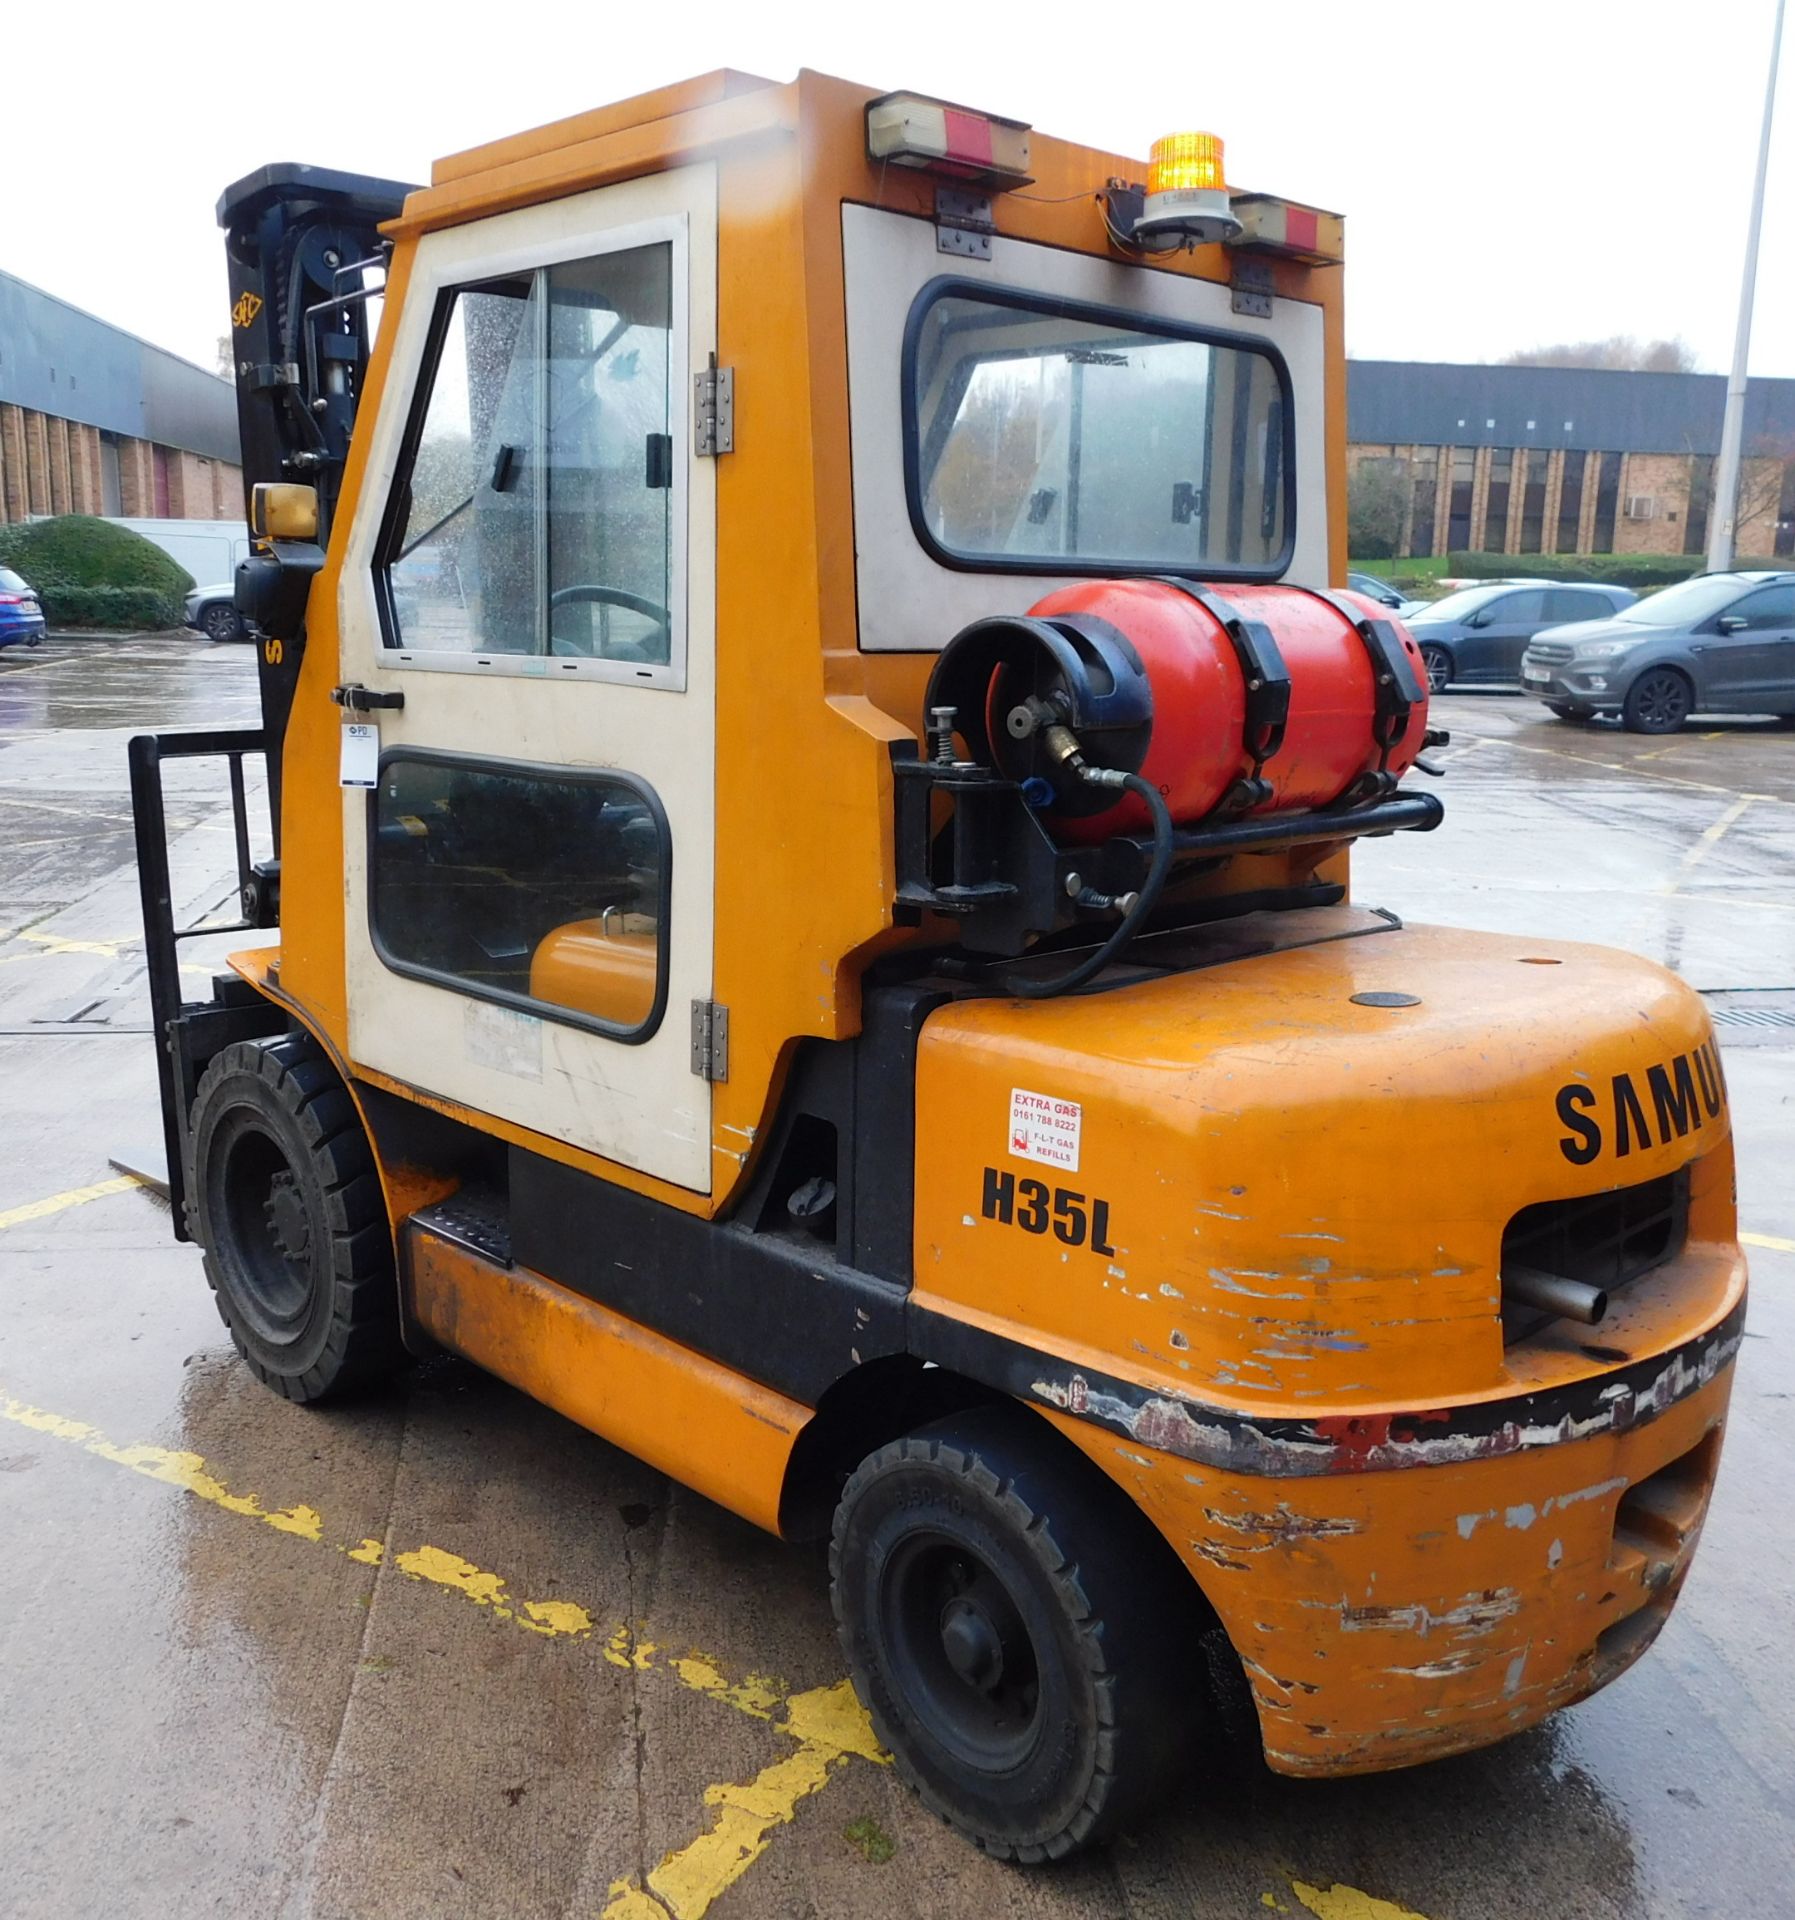 2007 Samuk H35L Gas Powered Forklift, Serial Number 070100559 (Located North Manchester. Please - Image 4 of 13